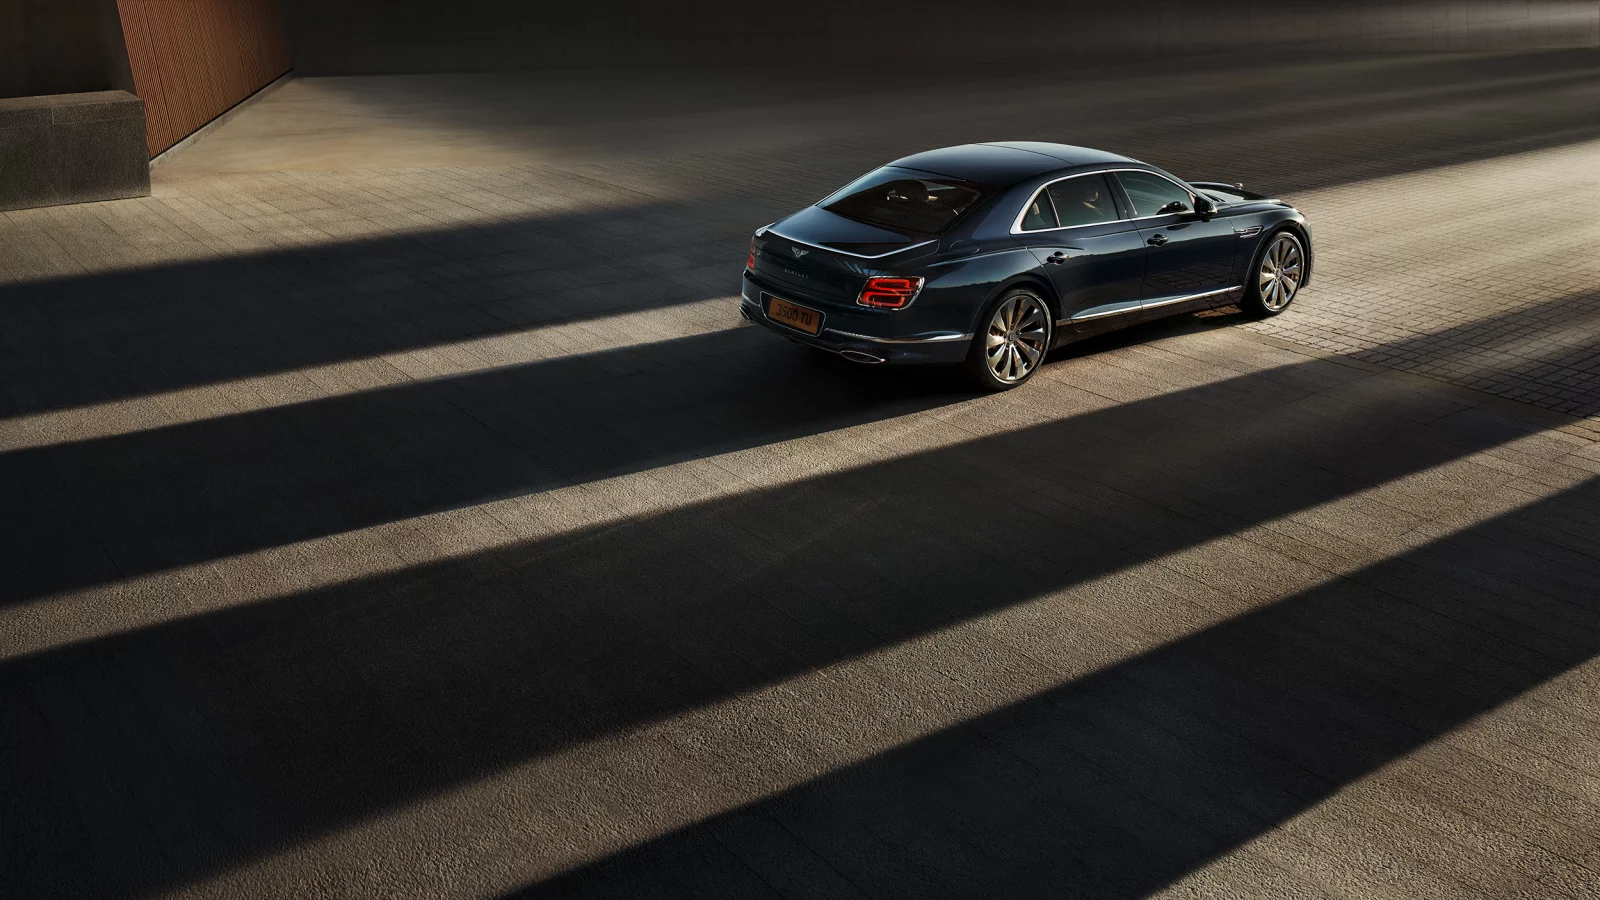 Bentley Flying Spur 10 by Marc TRAUTMANN